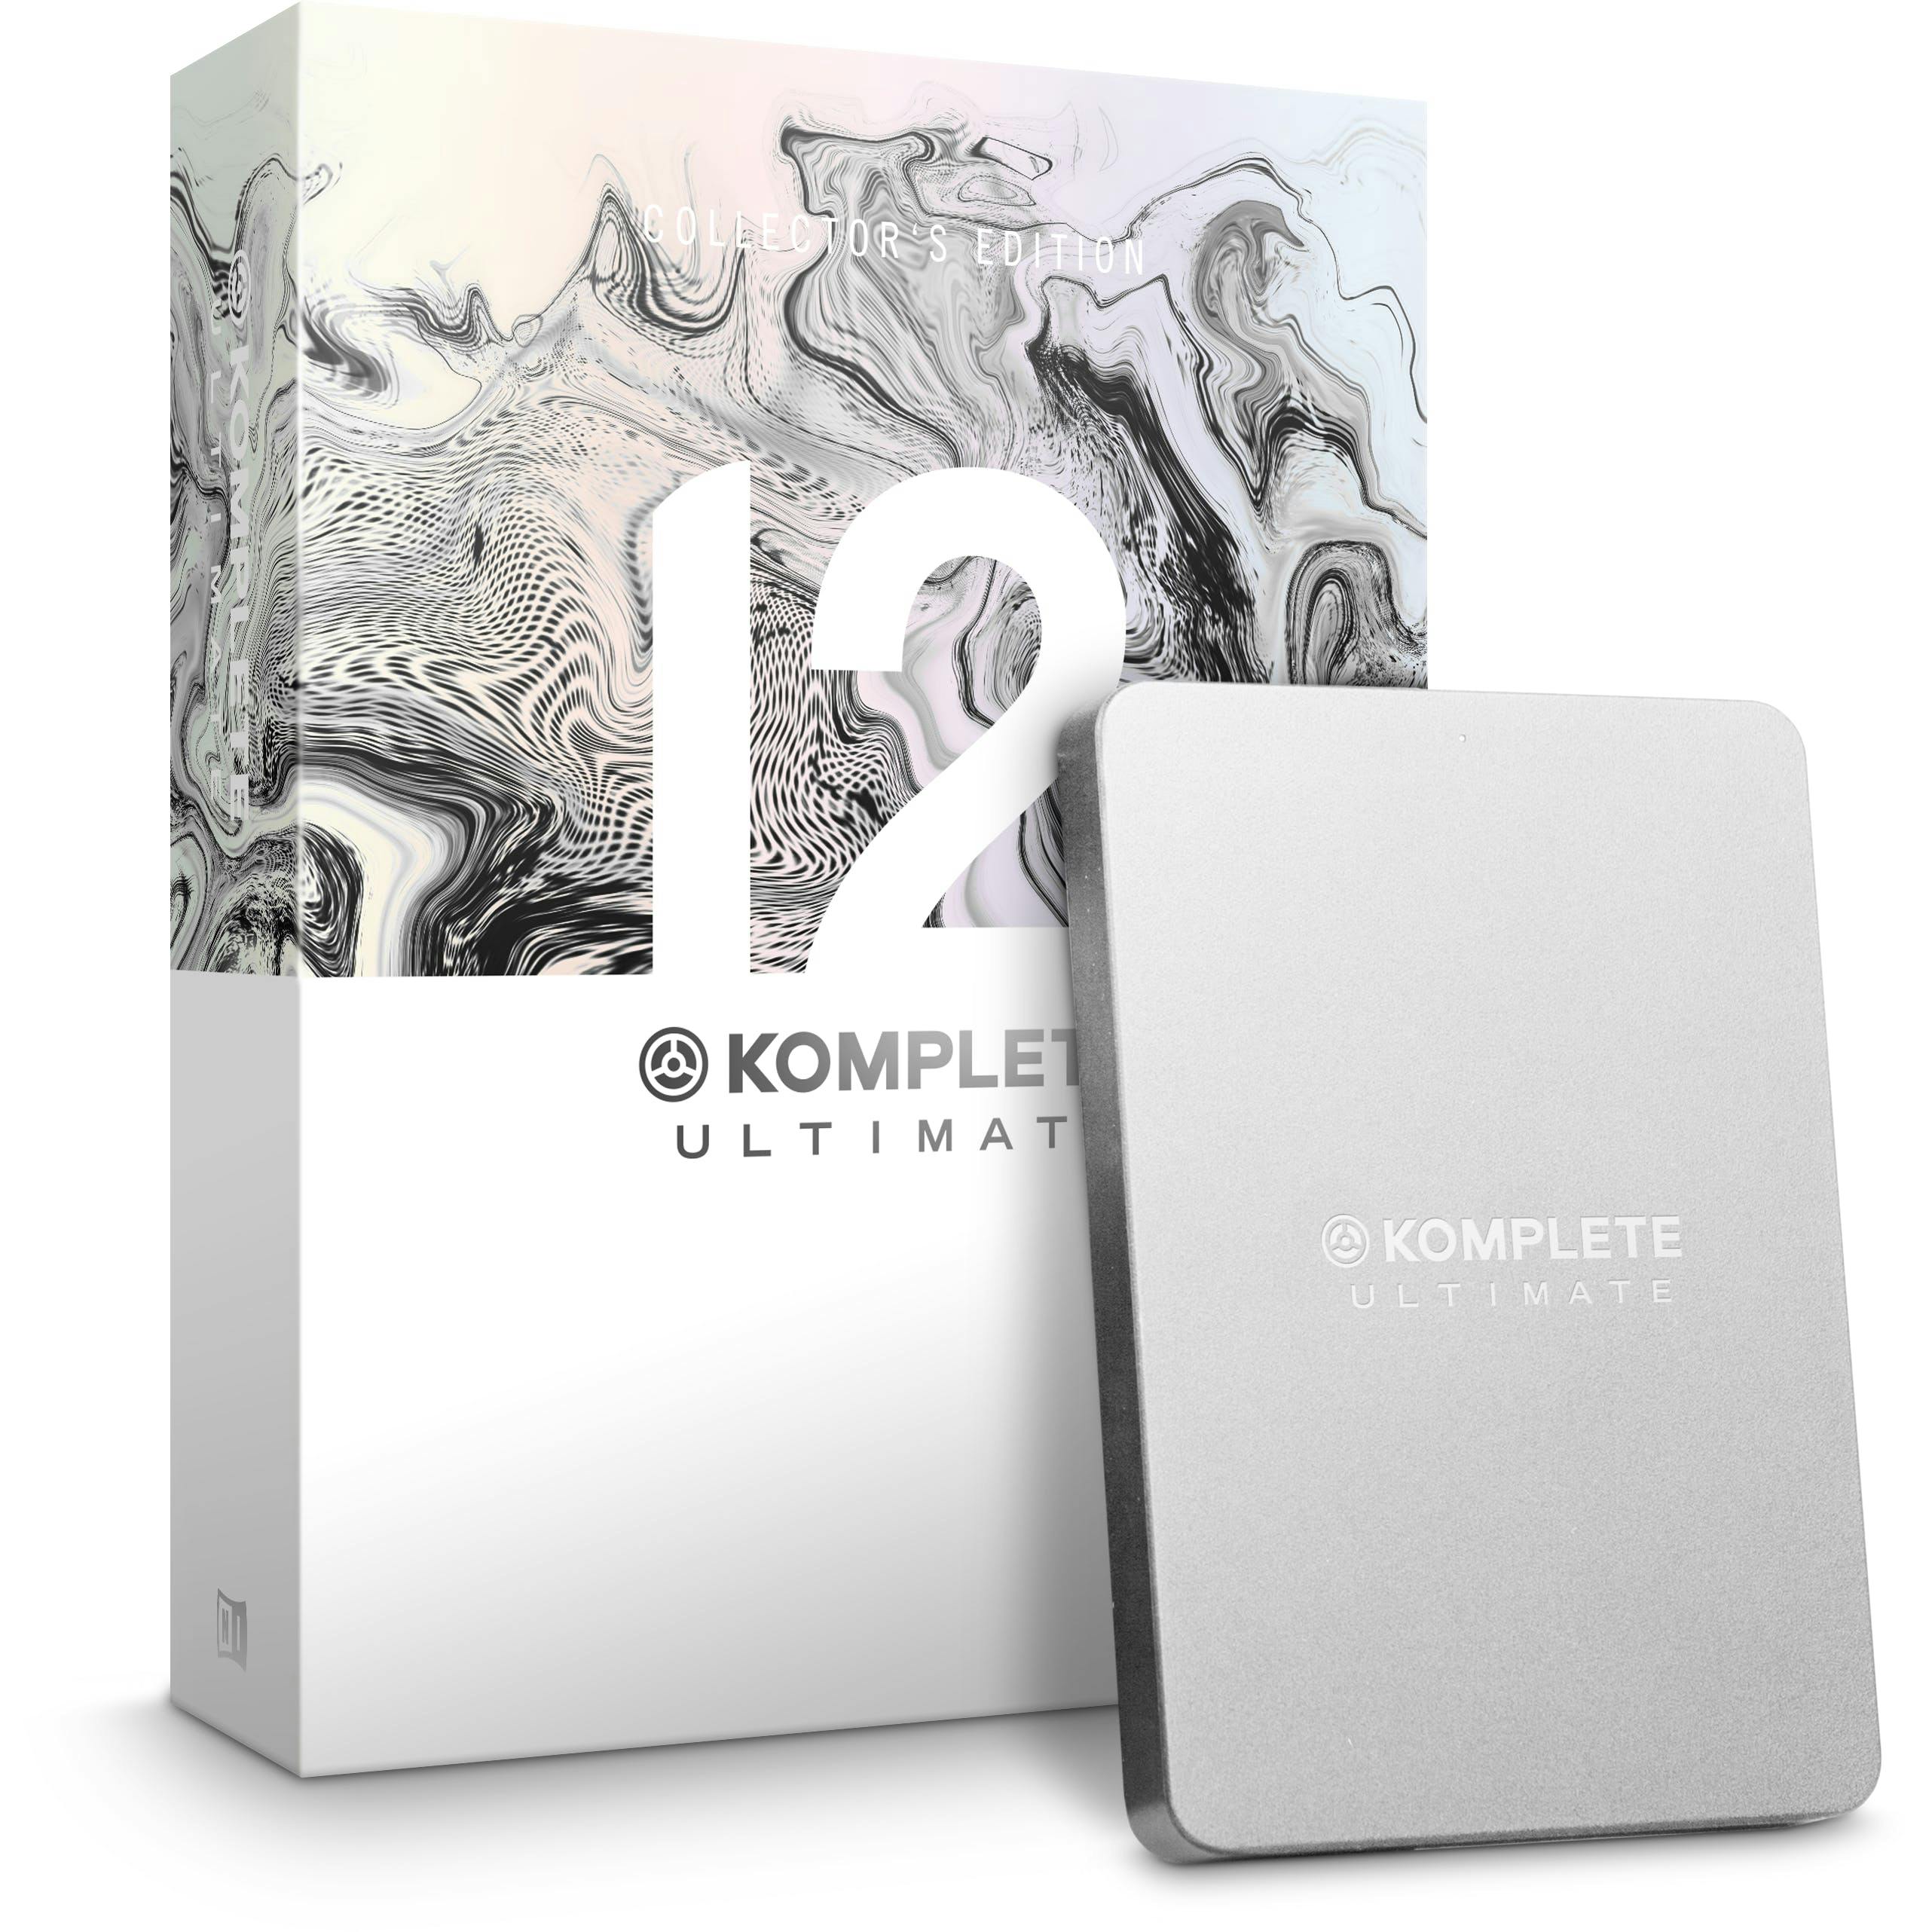 upgrade to komplete ultimate 11